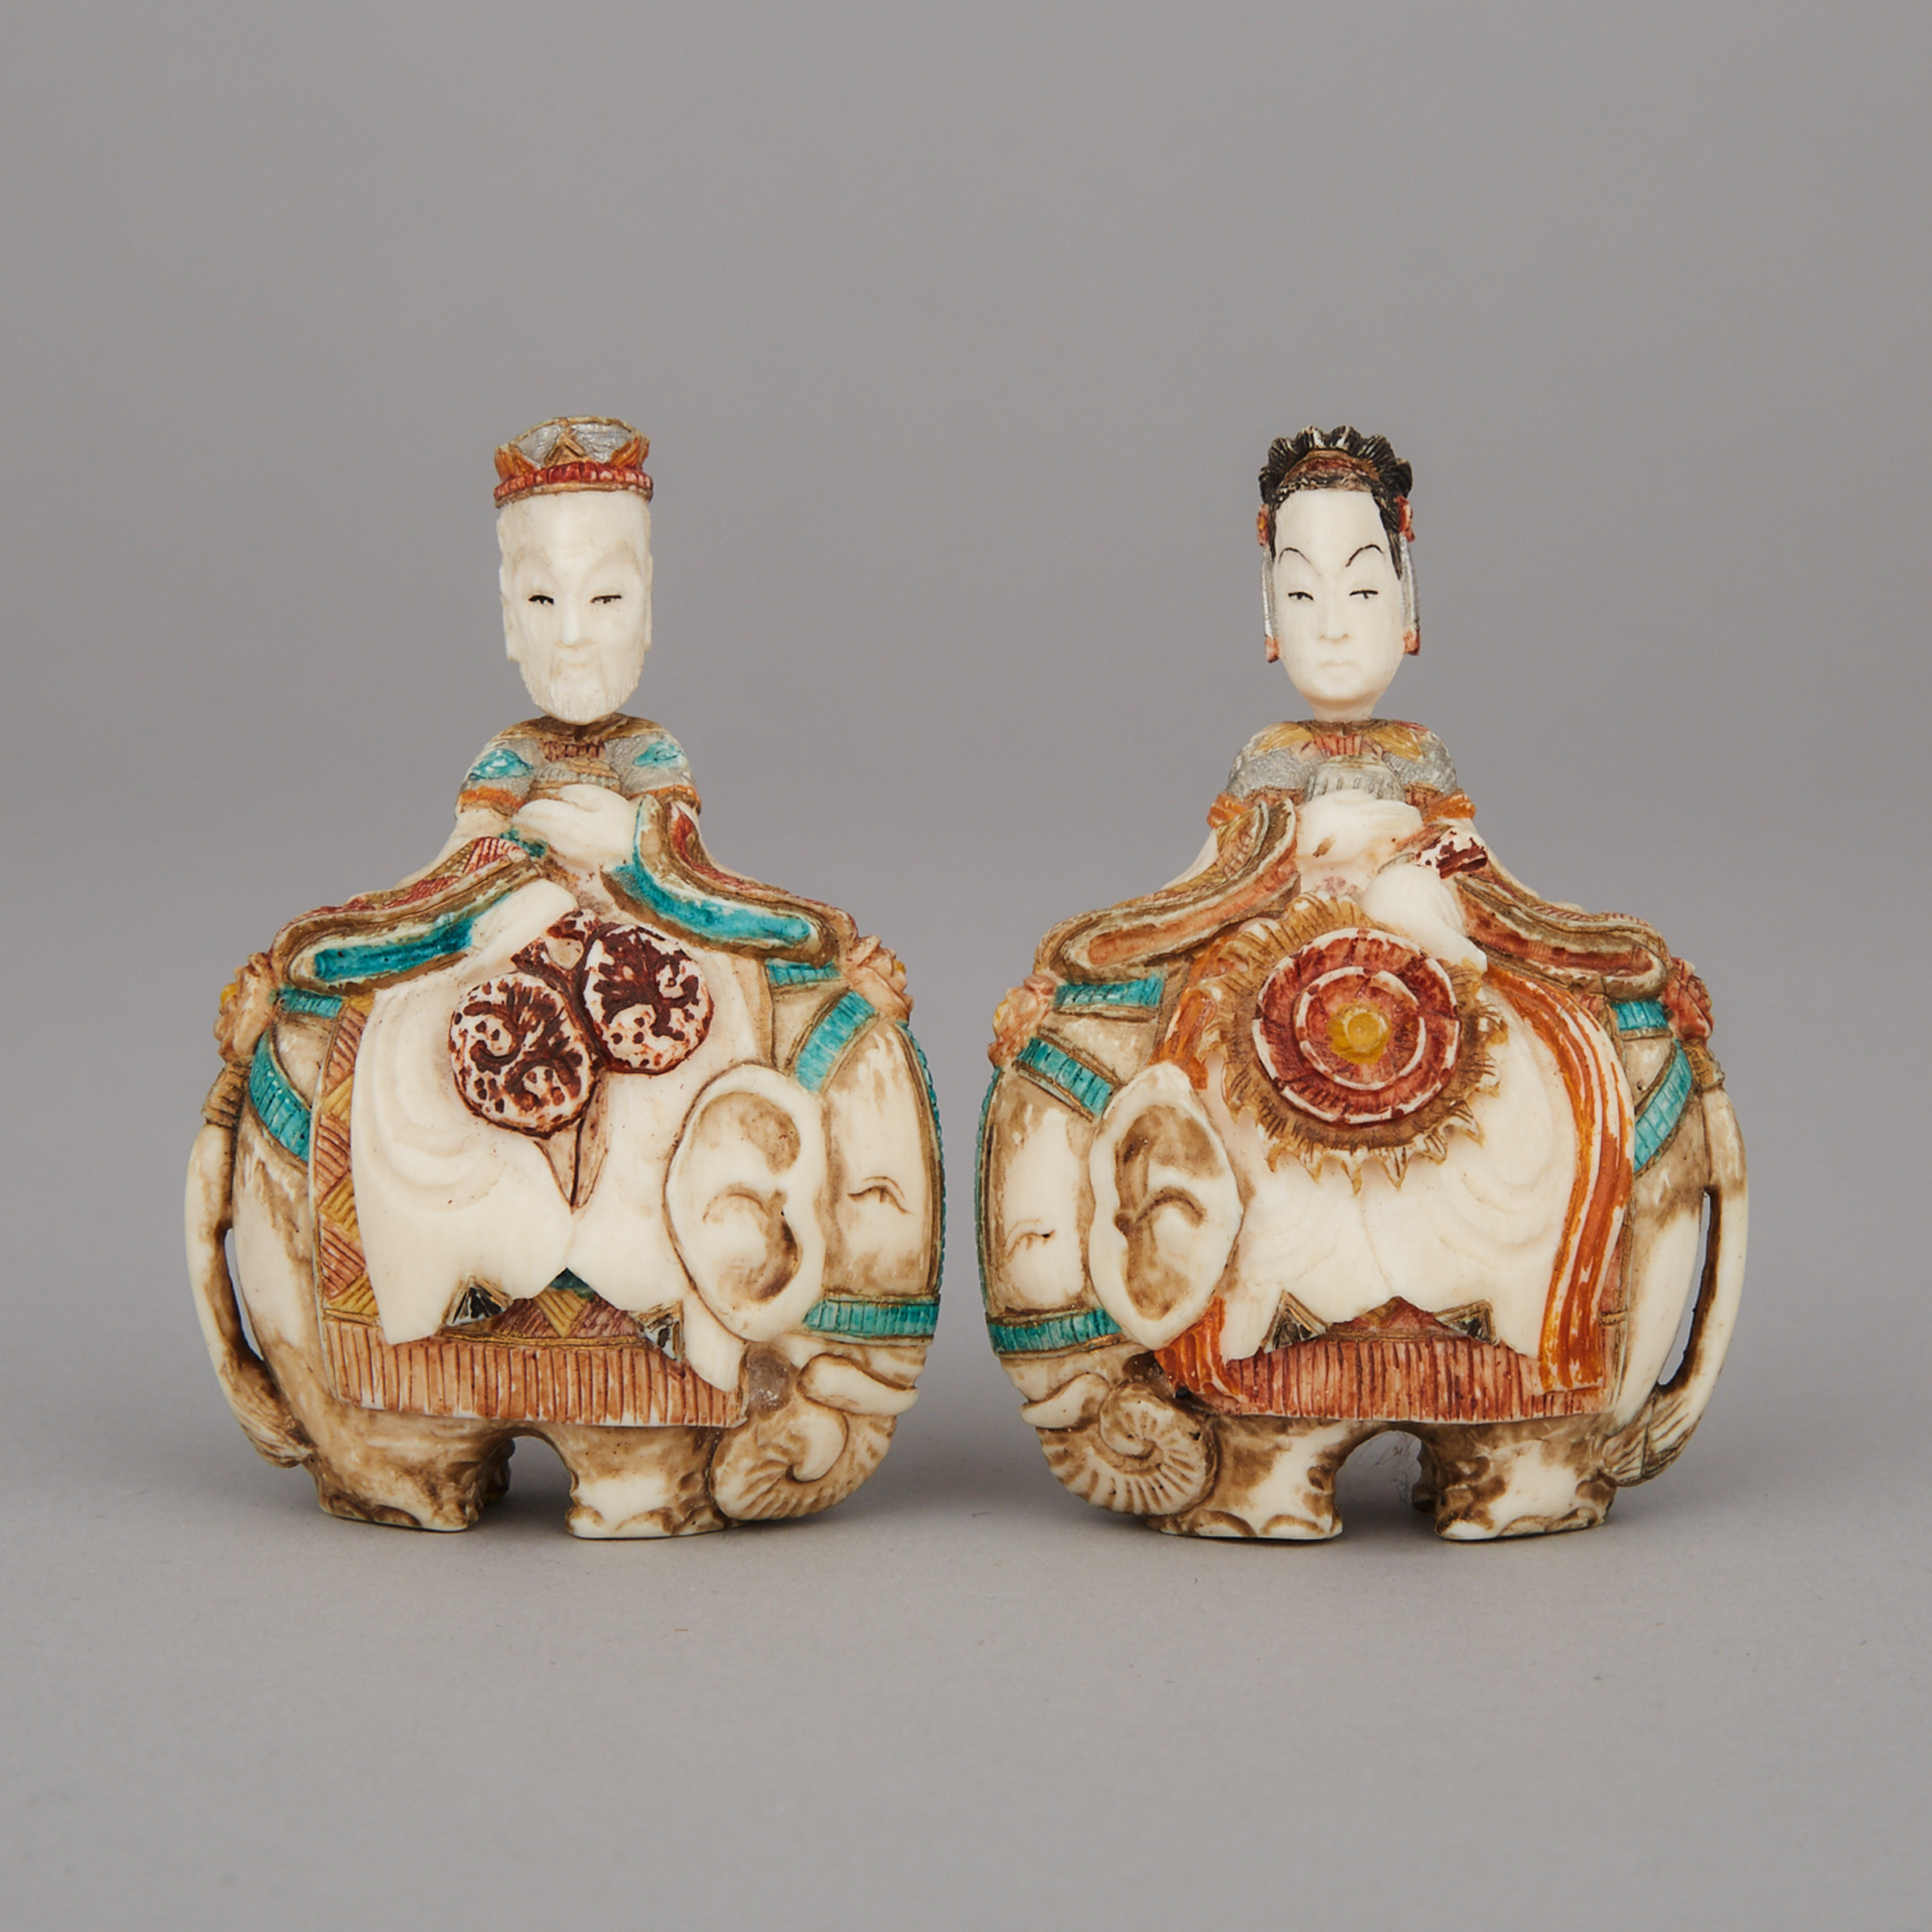 A Pair of Ivory Snuff Bottle Figures, 19th Century